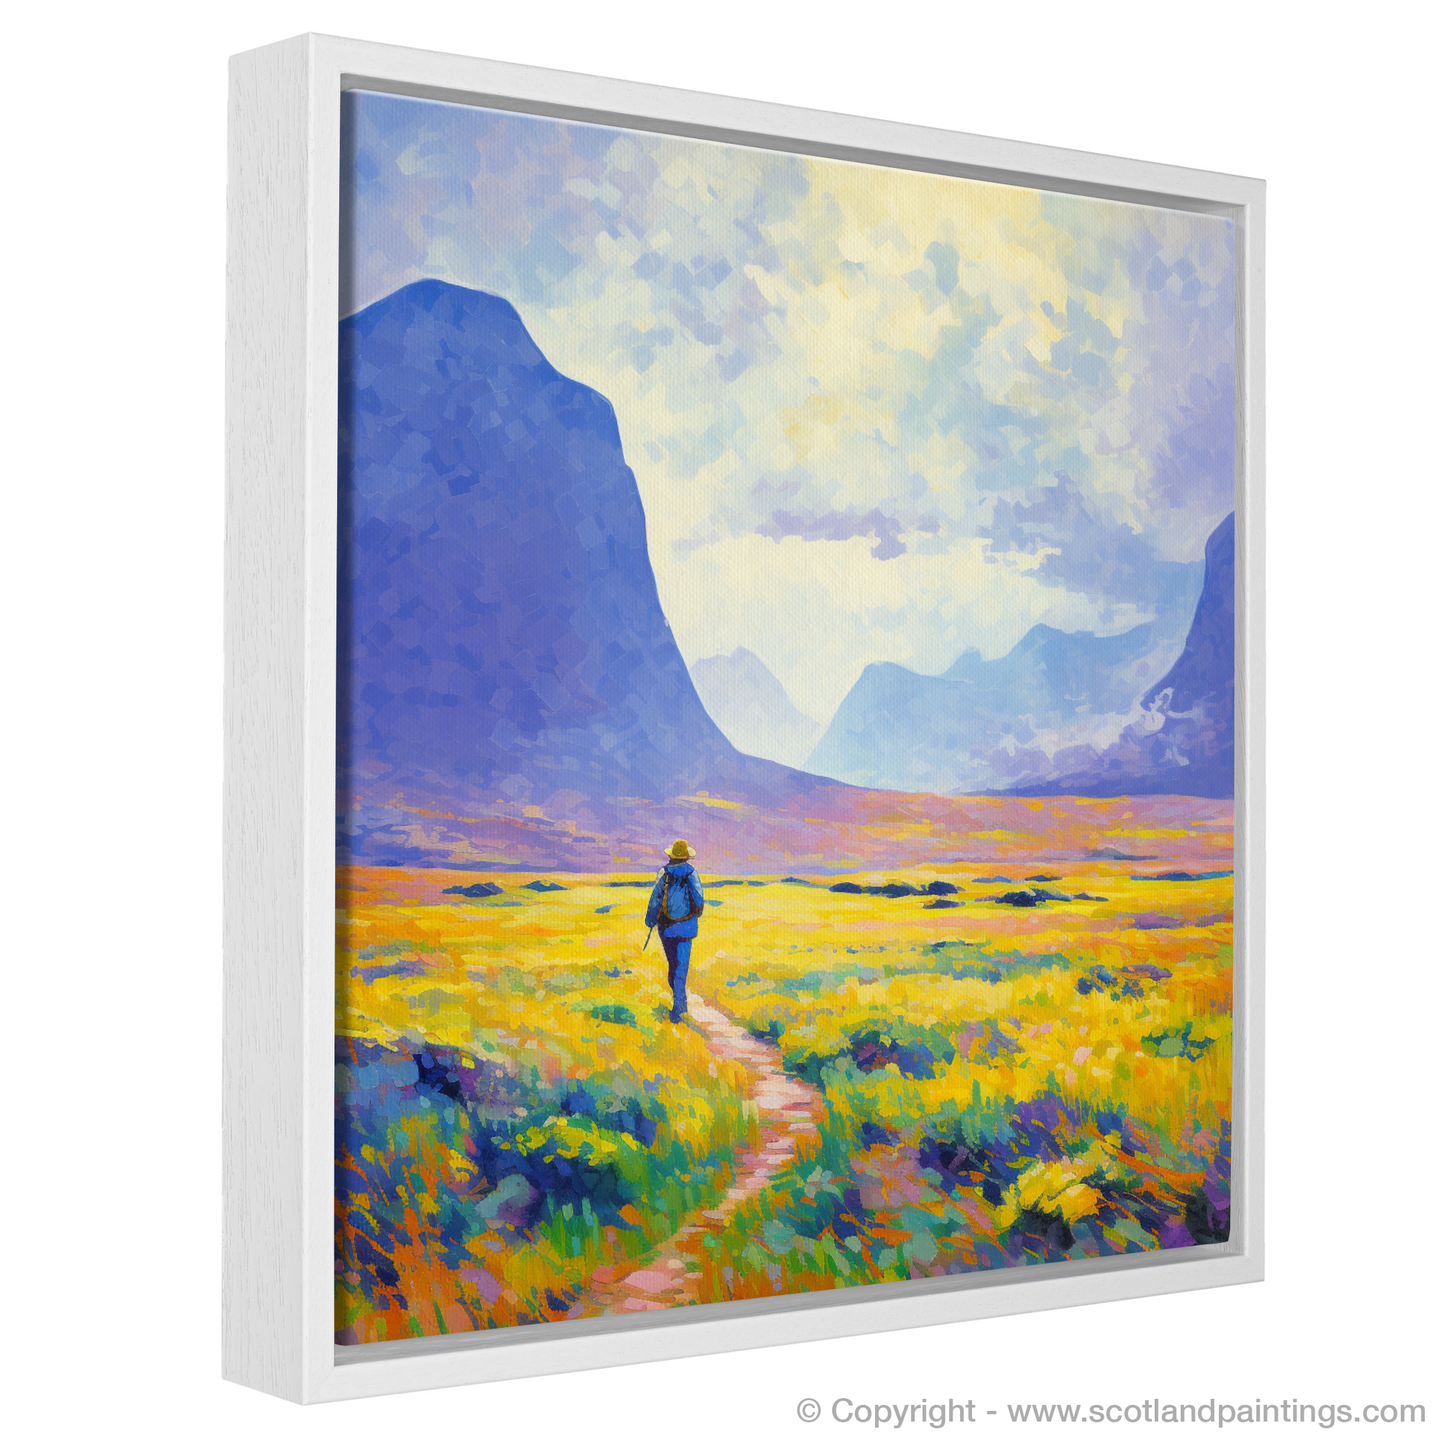 Painting and Art Print of Lone hiker in Glencoe during summer entitled "Highland Solitude: A Summer's Day in Glencoe".